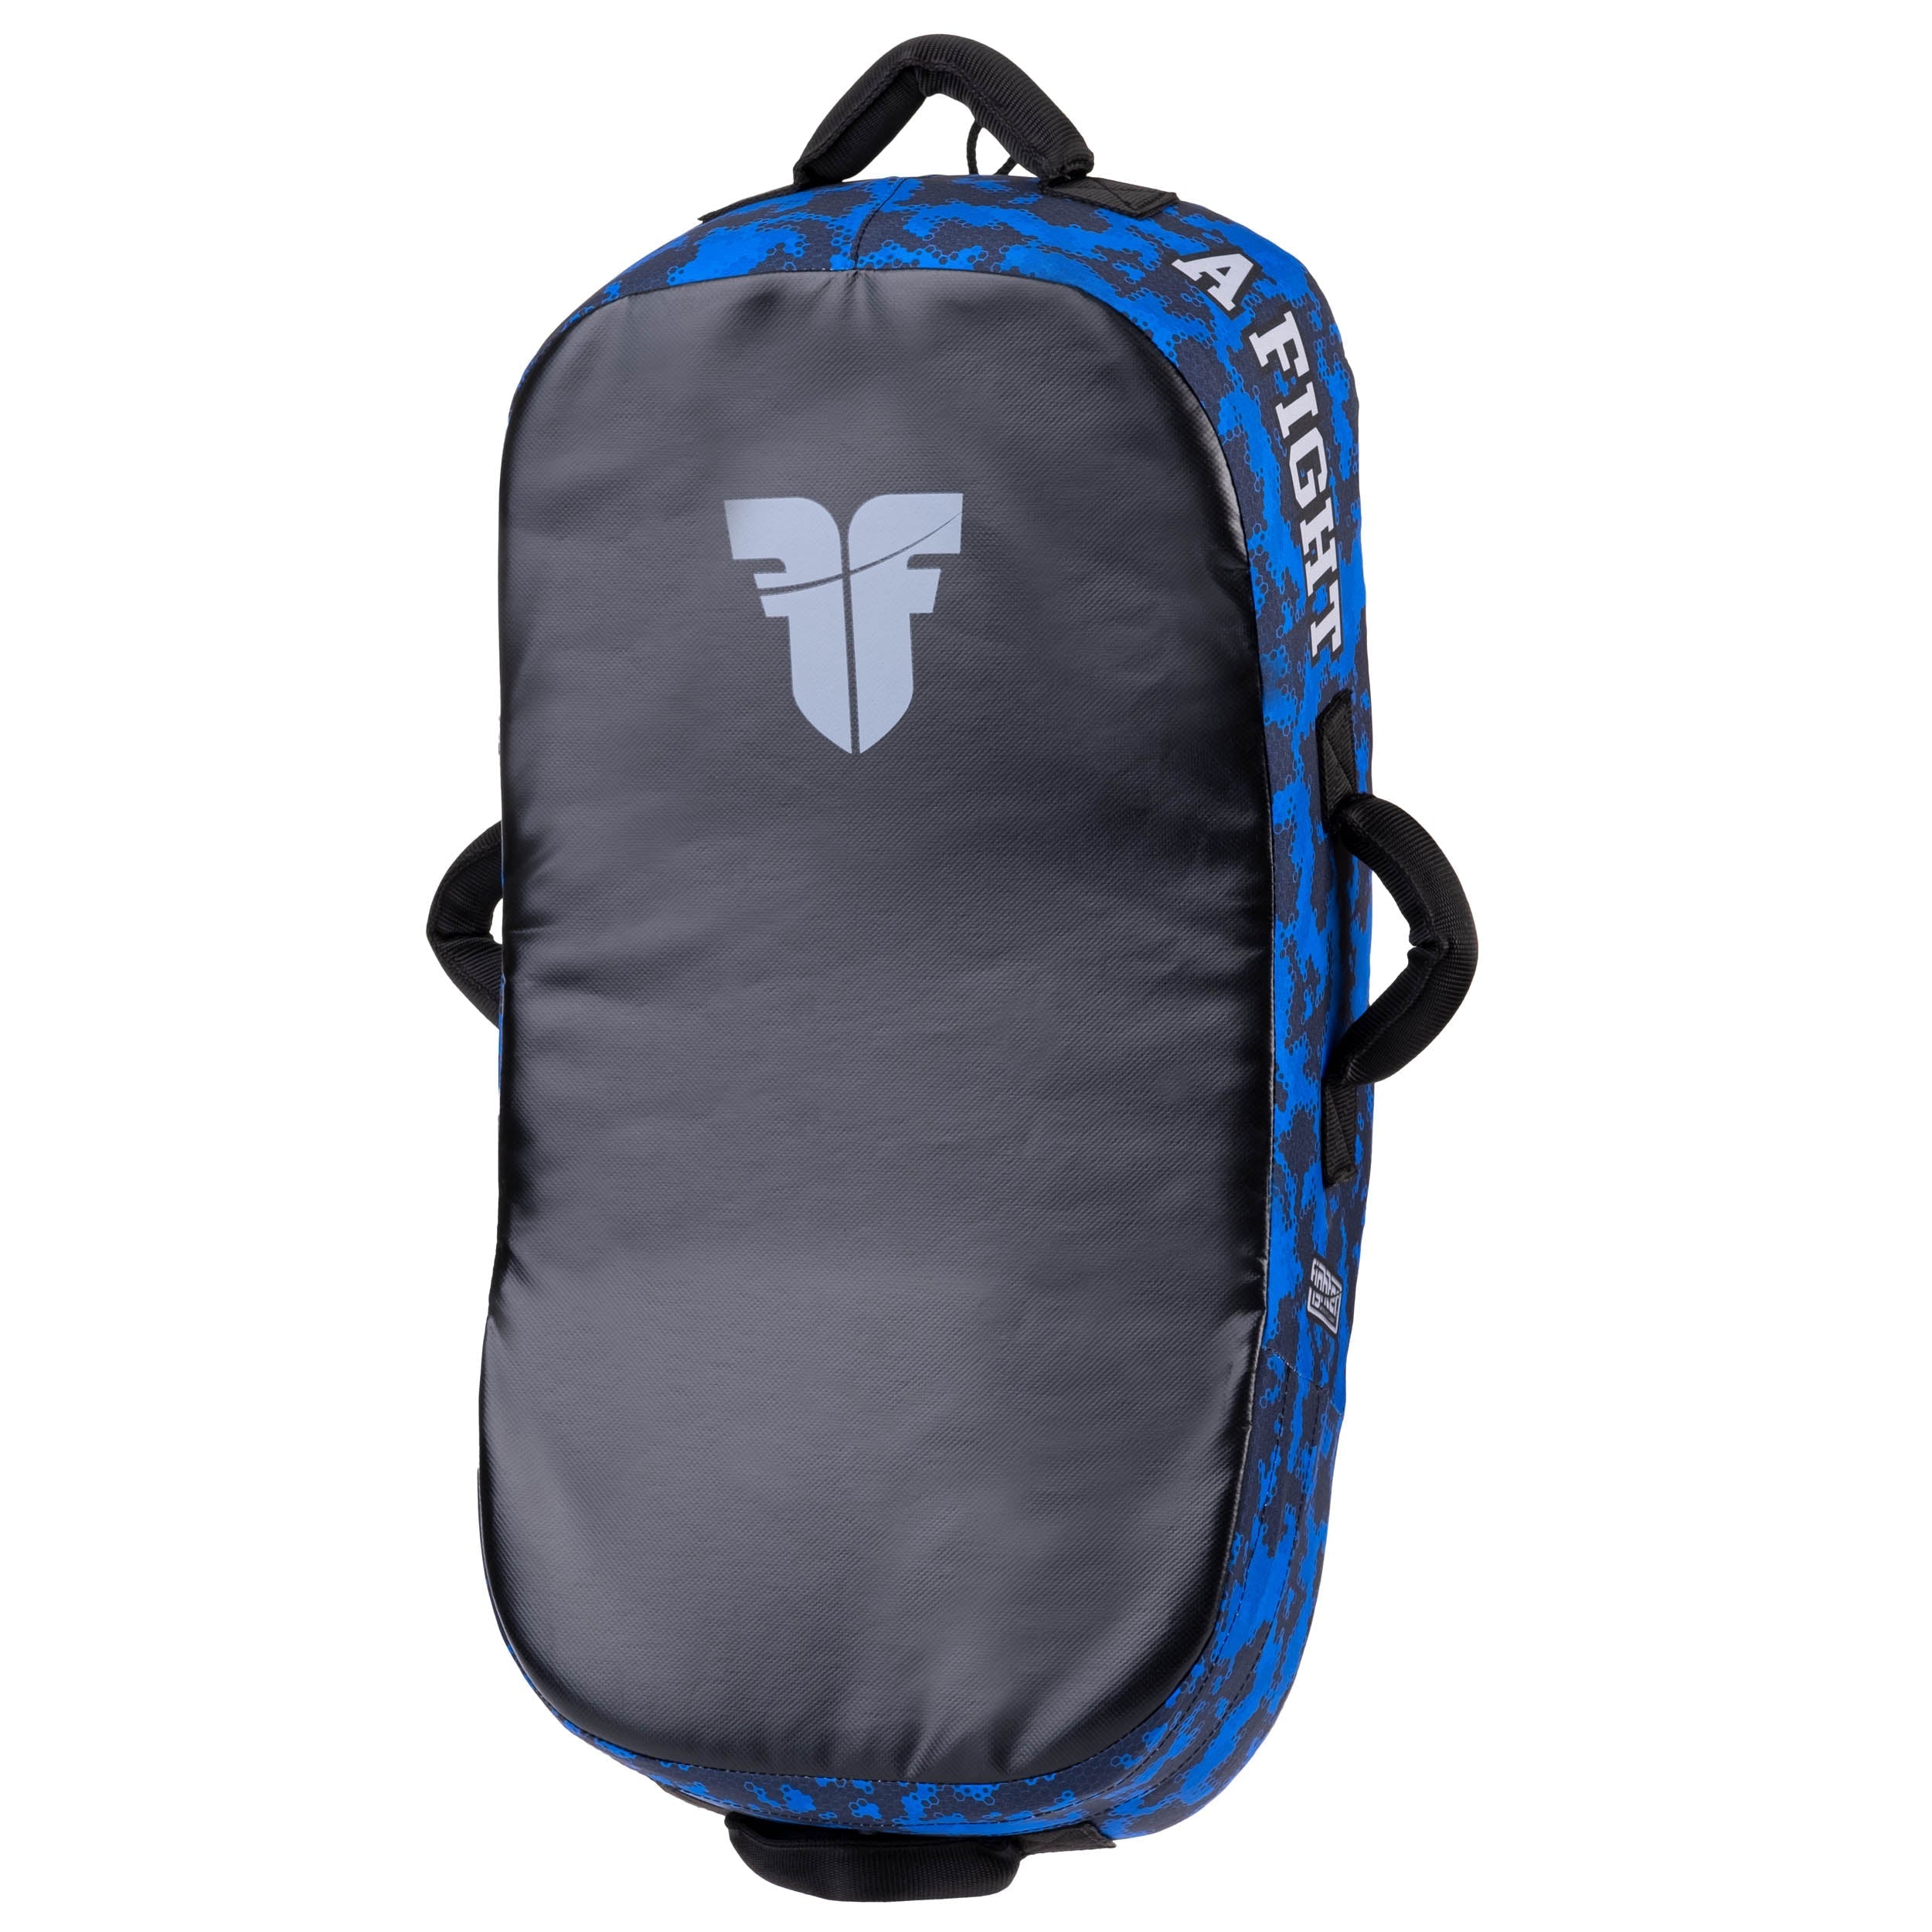 Fighter Kicking Shield - MULTI GRIP - Life is a Fight - Blue Camo, FKSH-28